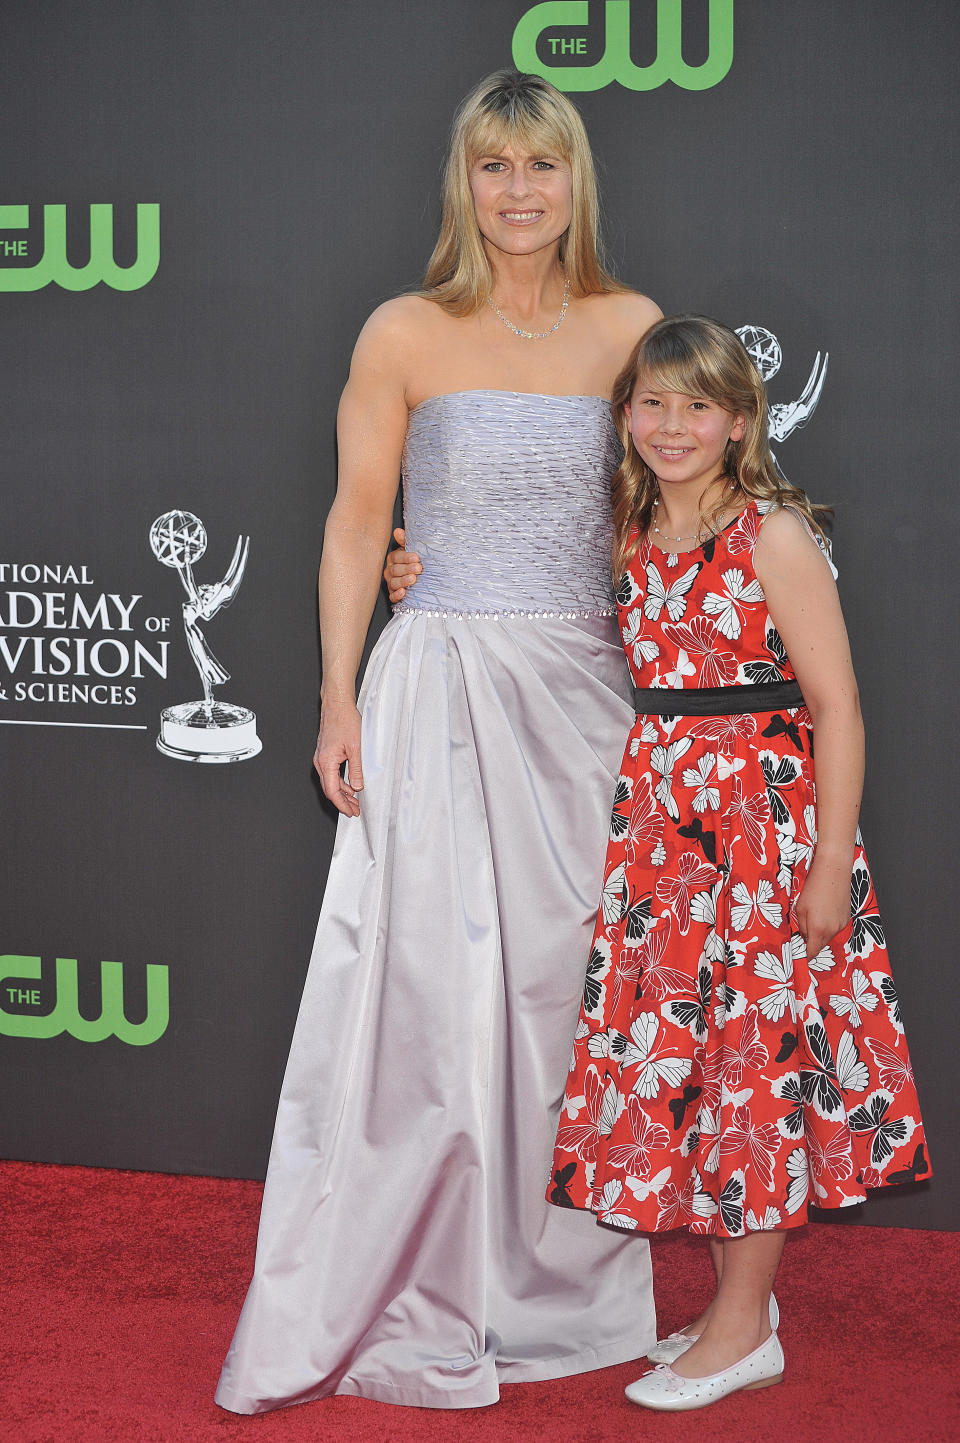 TV personality Bindi Irwin and mother Terri Irwin arrive at the 36th Annual Daytime Emmy Awards at The Orpheum Theatre.  (Photo by Frank Trapper/Corbis via Getty Images)